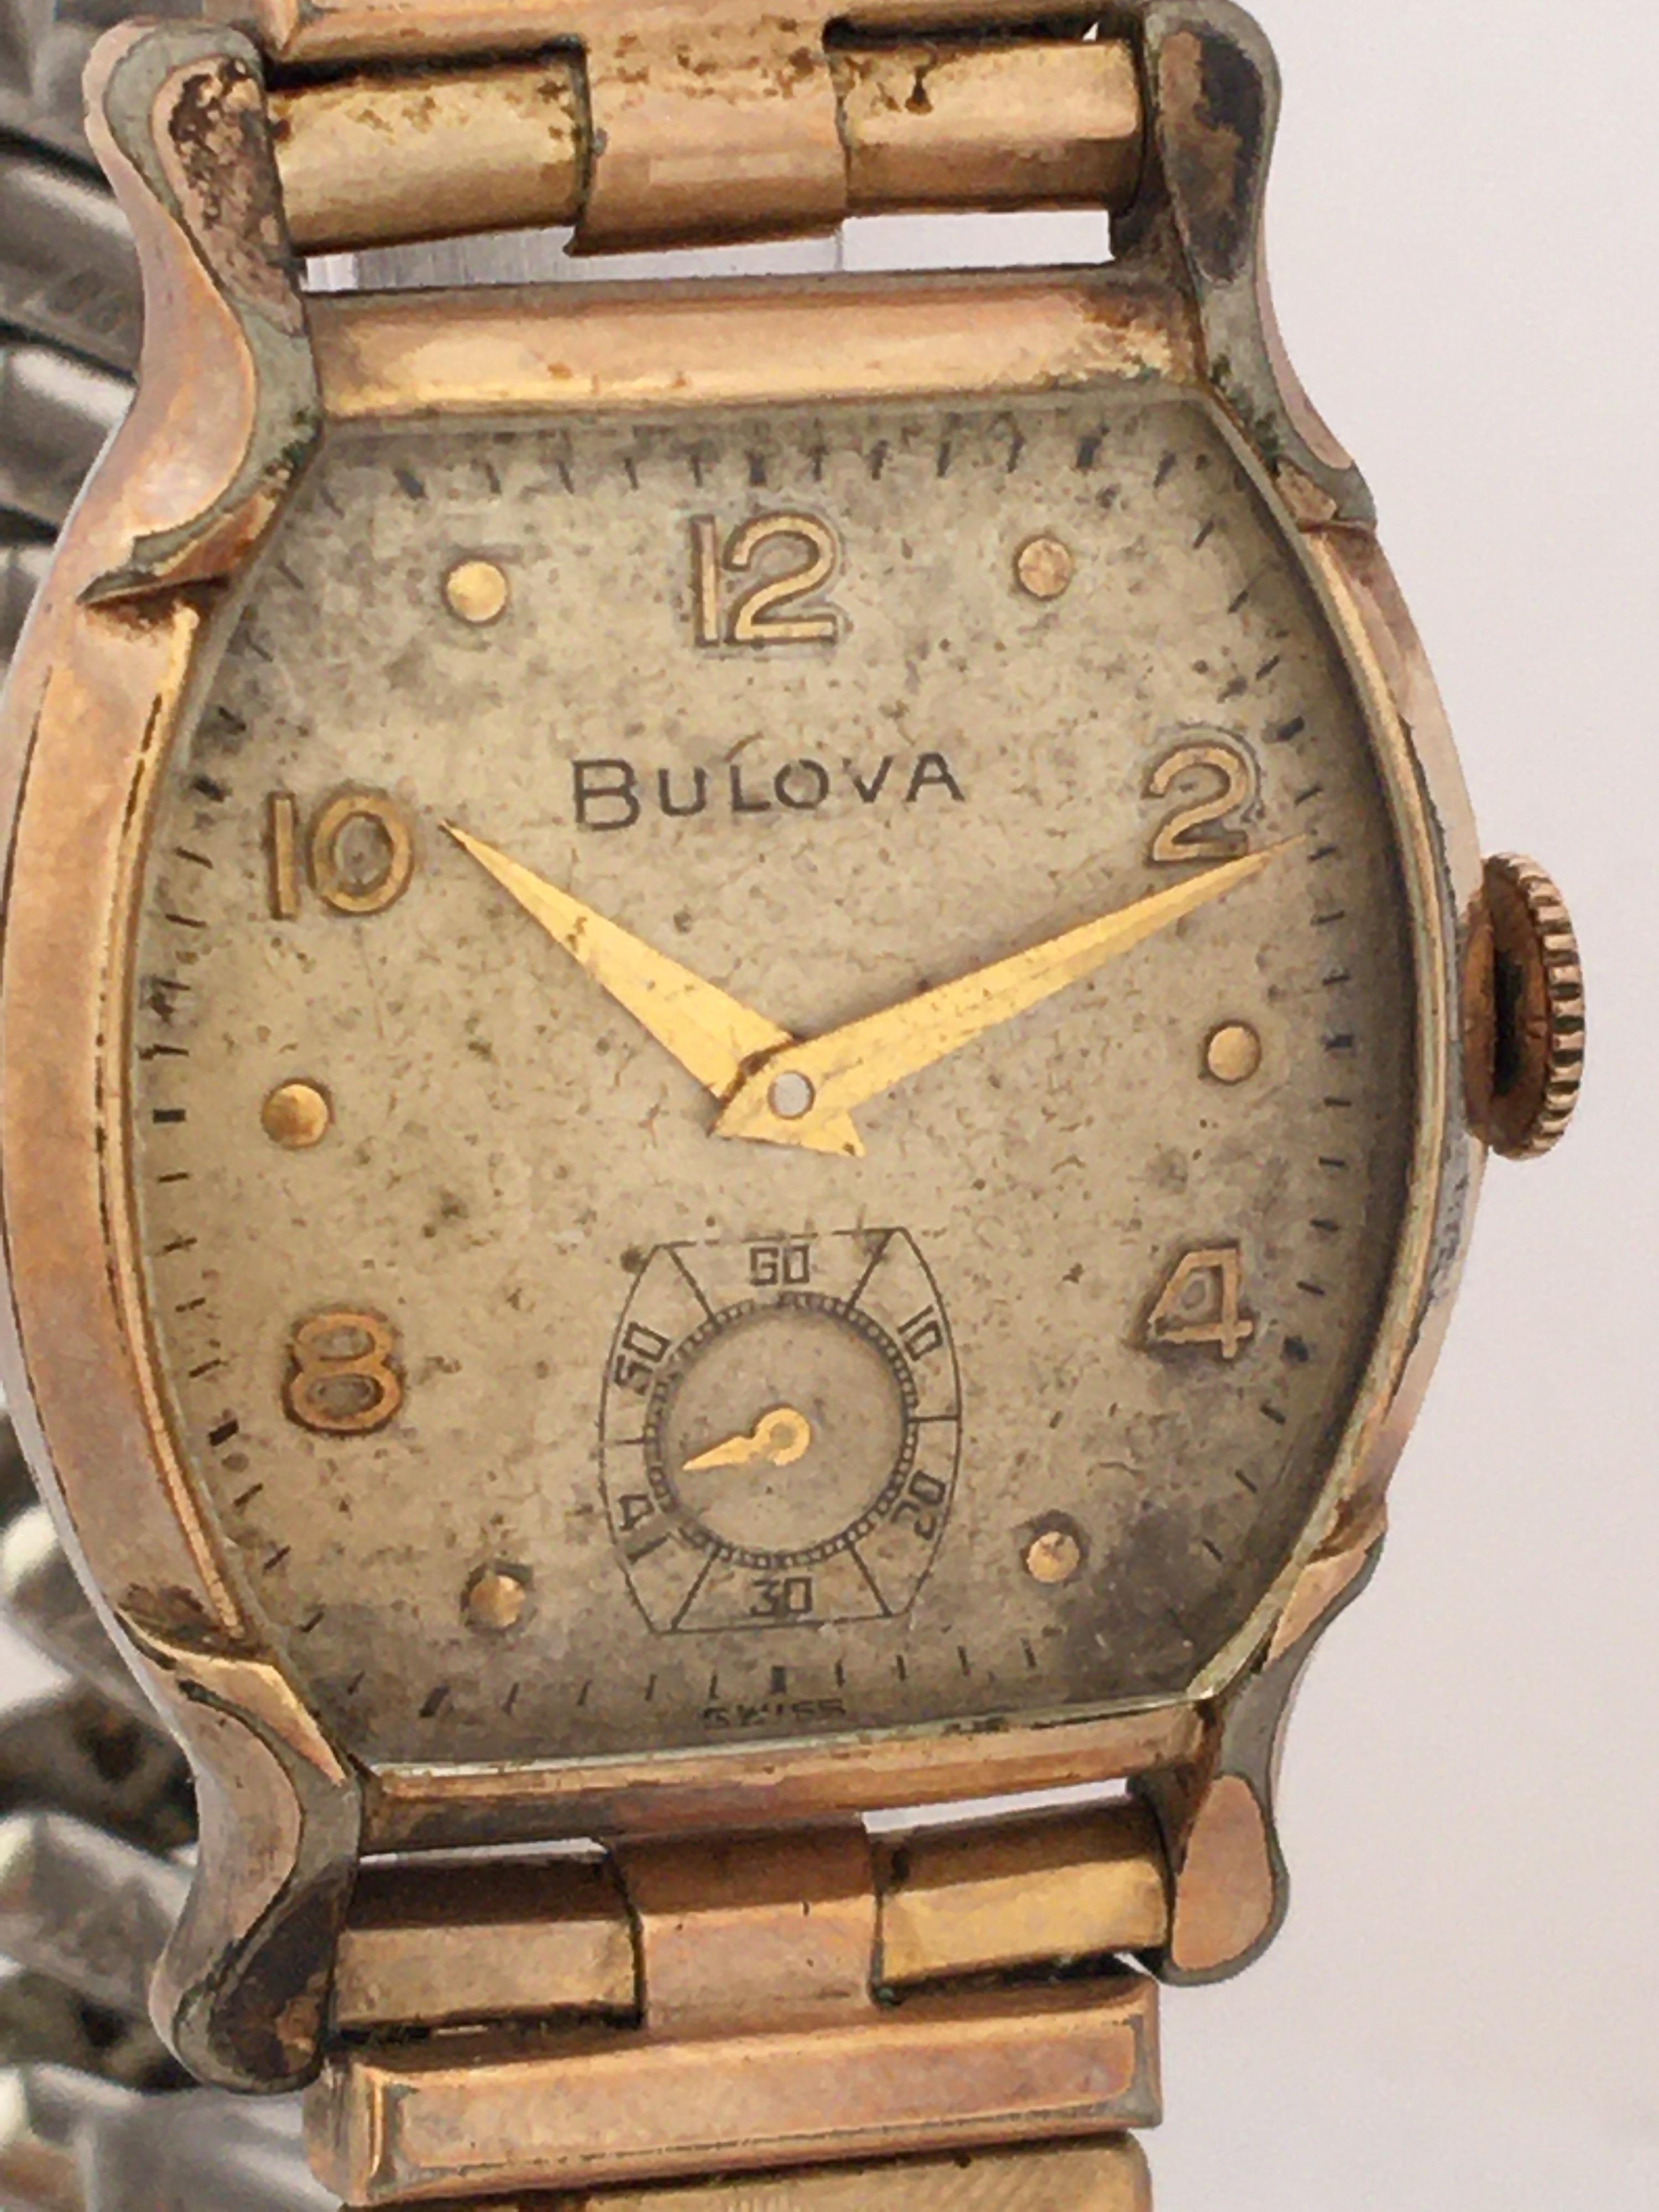 This beautiful vintage mechanical watch is working and it is ticking well. It has aged and tarnished. Tiny scratches on the glass and watch case as shown, the dial is a bit tired as aged.

Please study the images carefully as form part of the